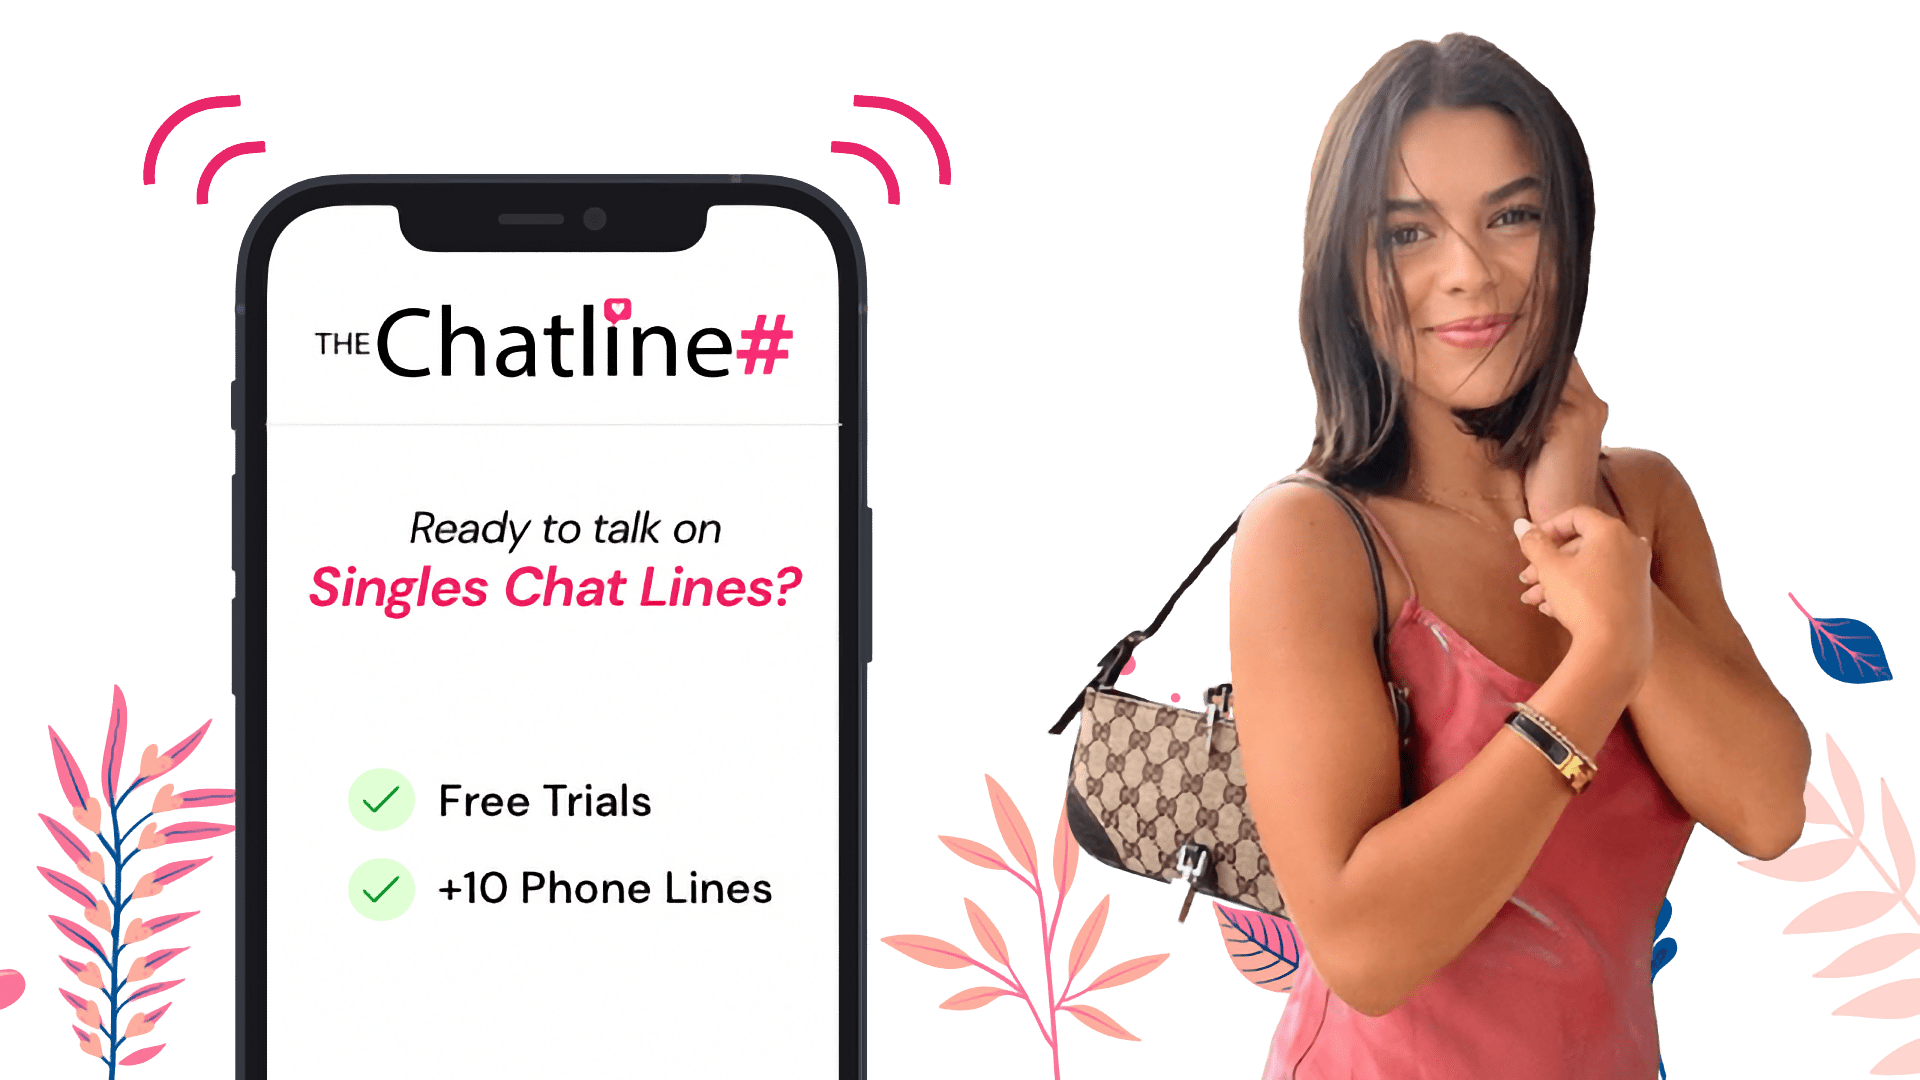 Free Trial Phone Chat Lines